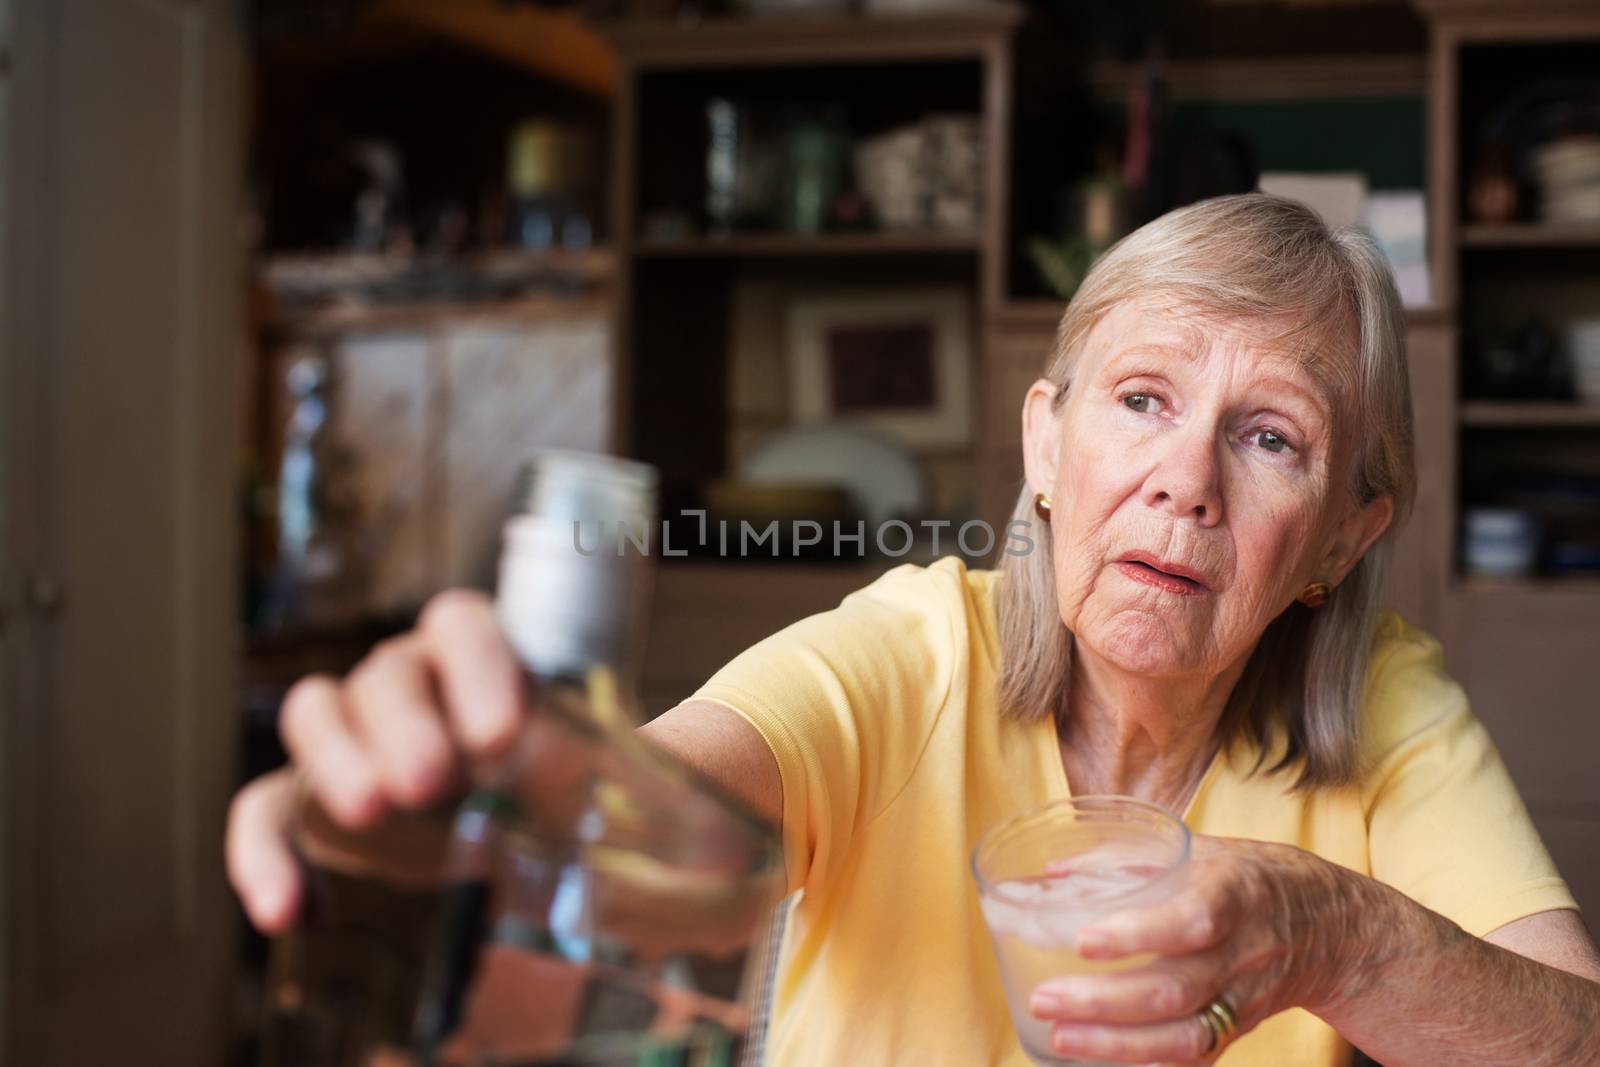 Woman reaching for bottle of liquor by Creatista